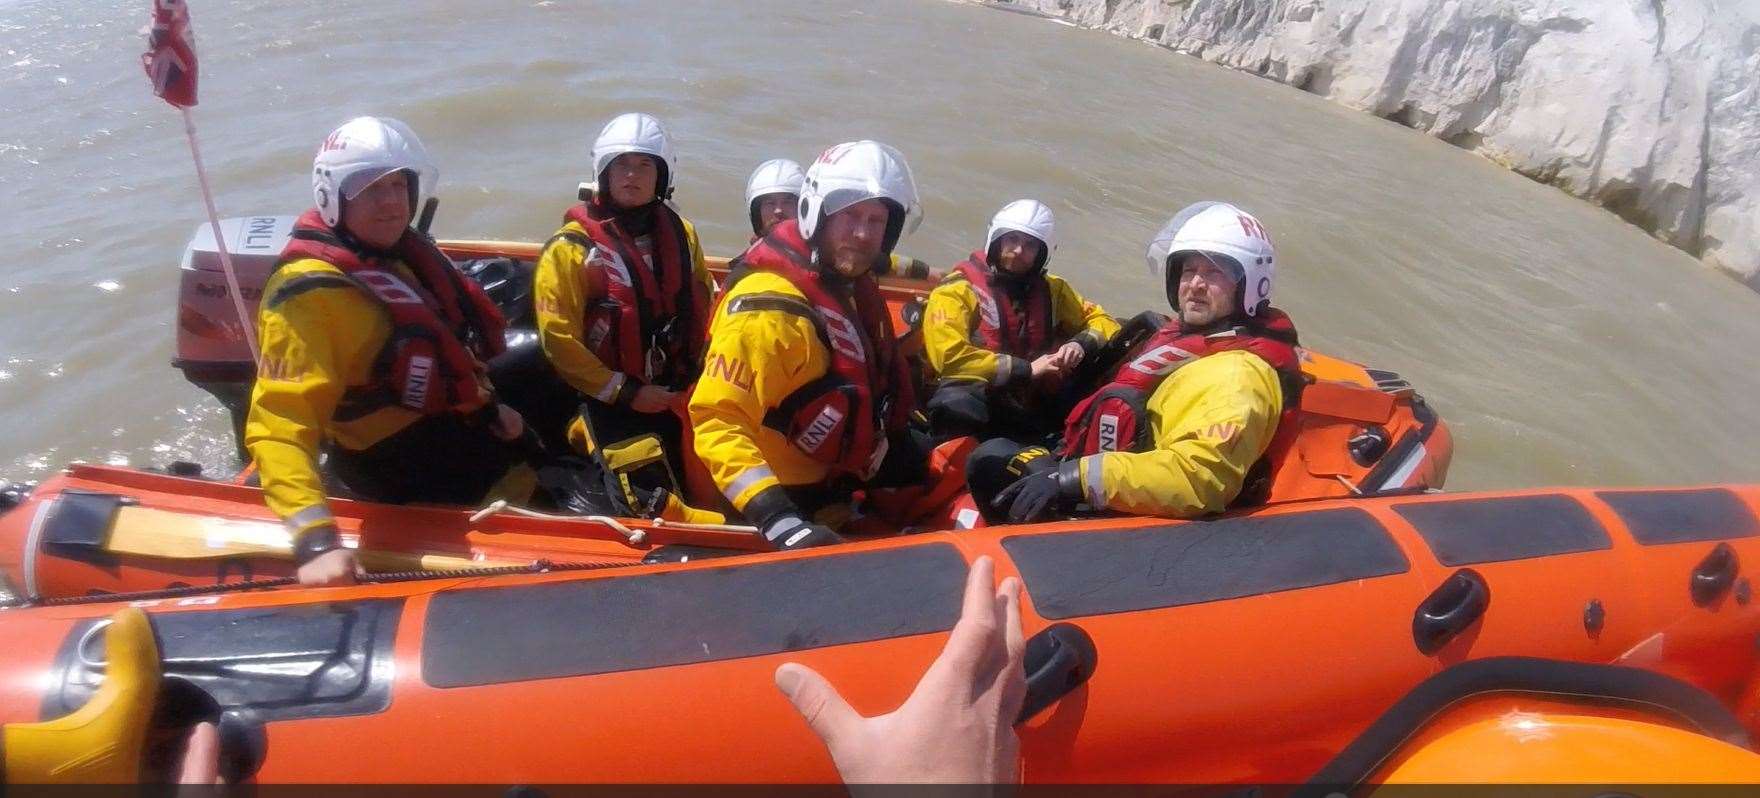 The team during the rescue